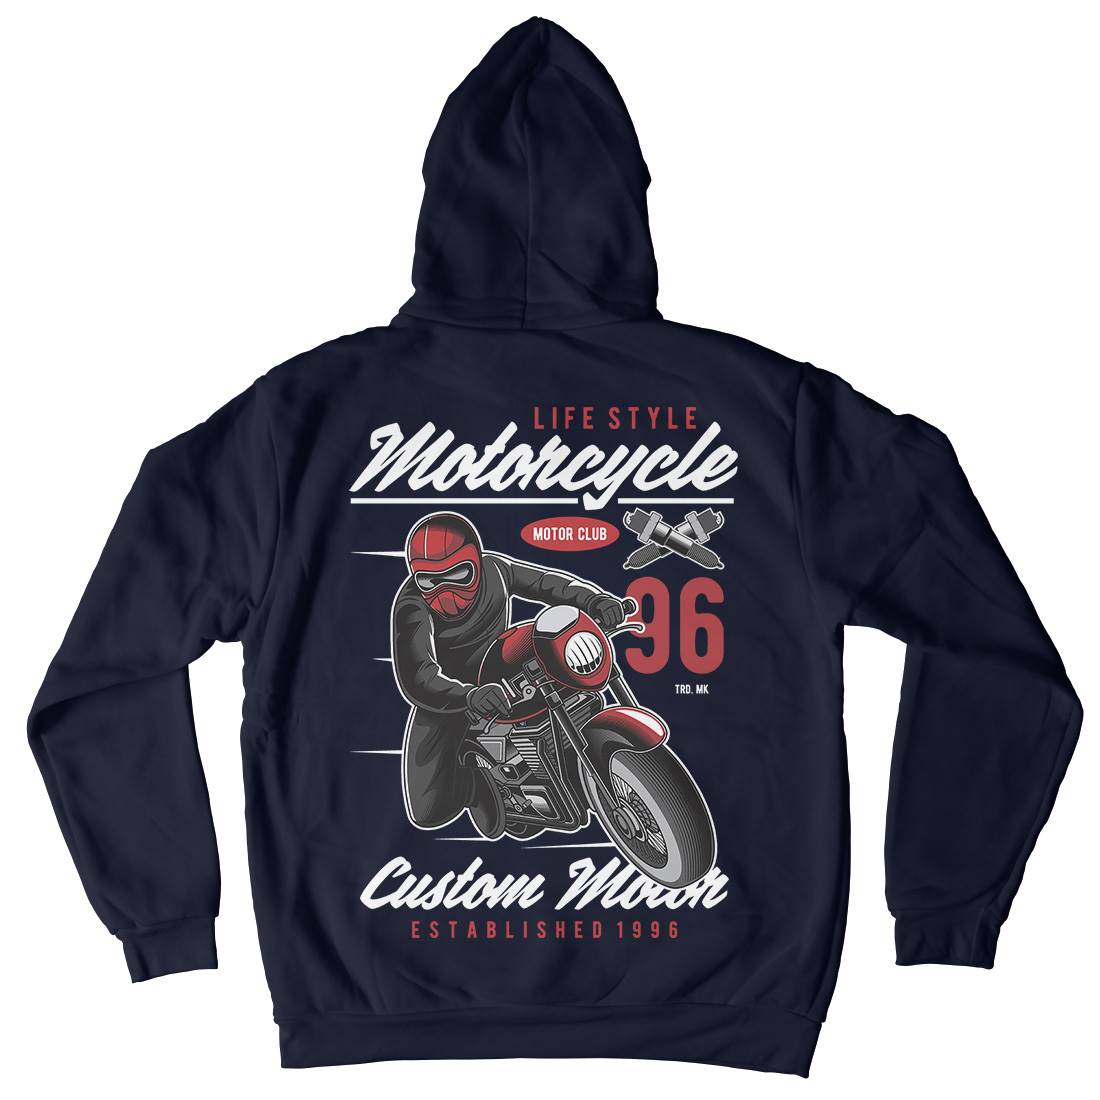 Lifestyle Mens Hoodie With Pocket Motorcycles C399